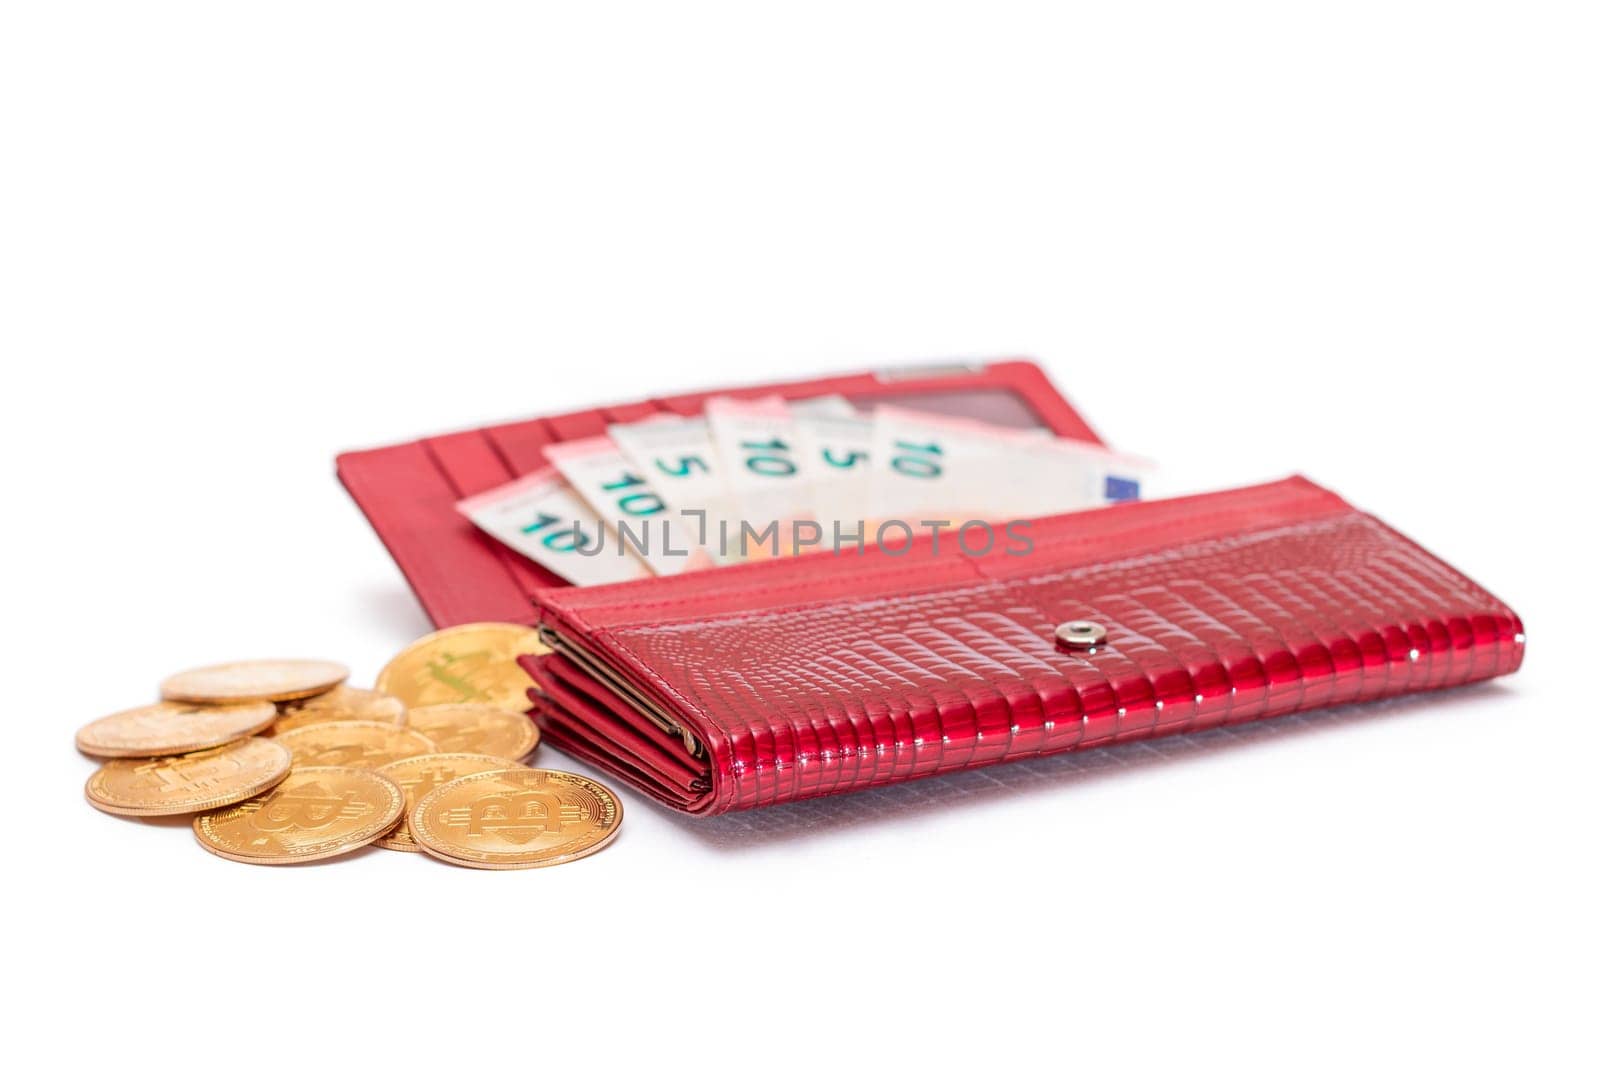 Opened Red Women Purse with 10 Euro Banknotes Inside and Bitcoin Coins - Isolated on White by InfinitumProdux